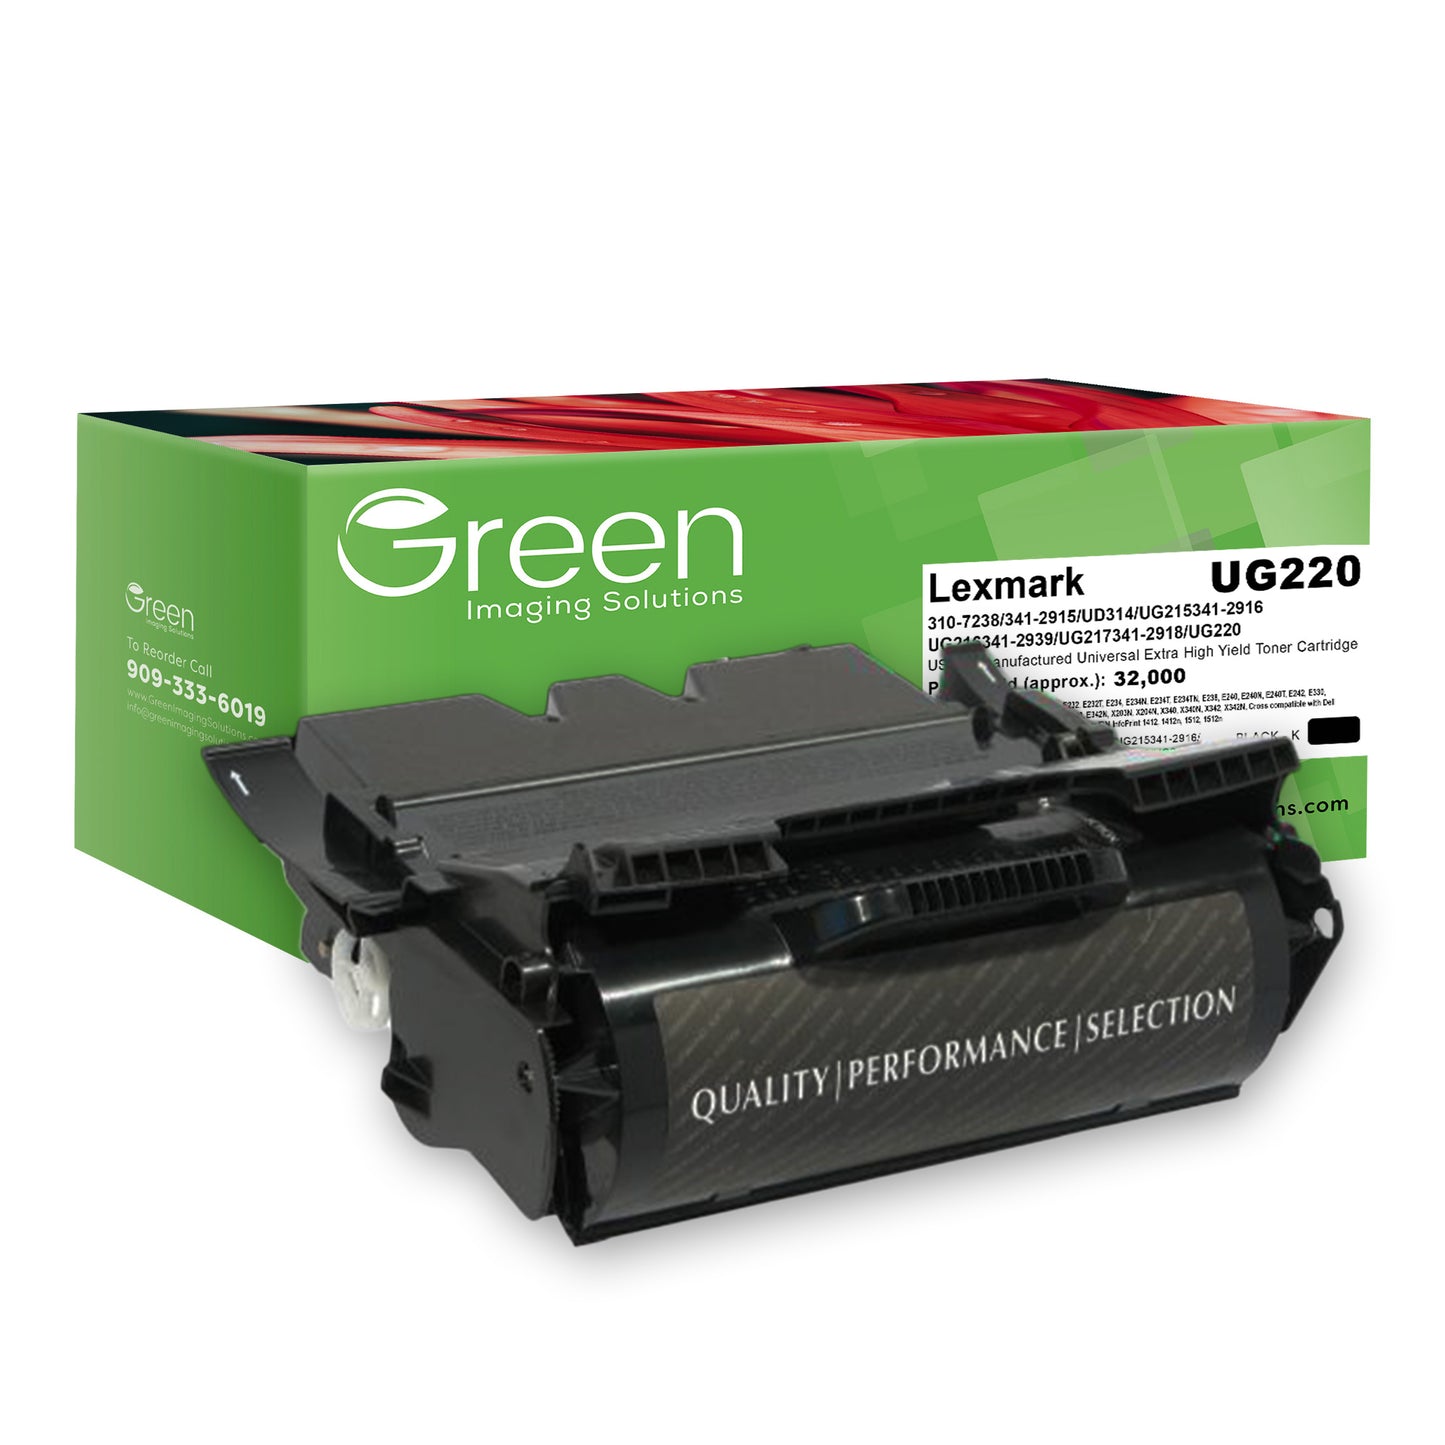 Green Imaging Solutions USA Remanufactured Universal Extra High Yield Toner Cartridge for Lexmark T640/T642/T644/T646/X642/X644/X646